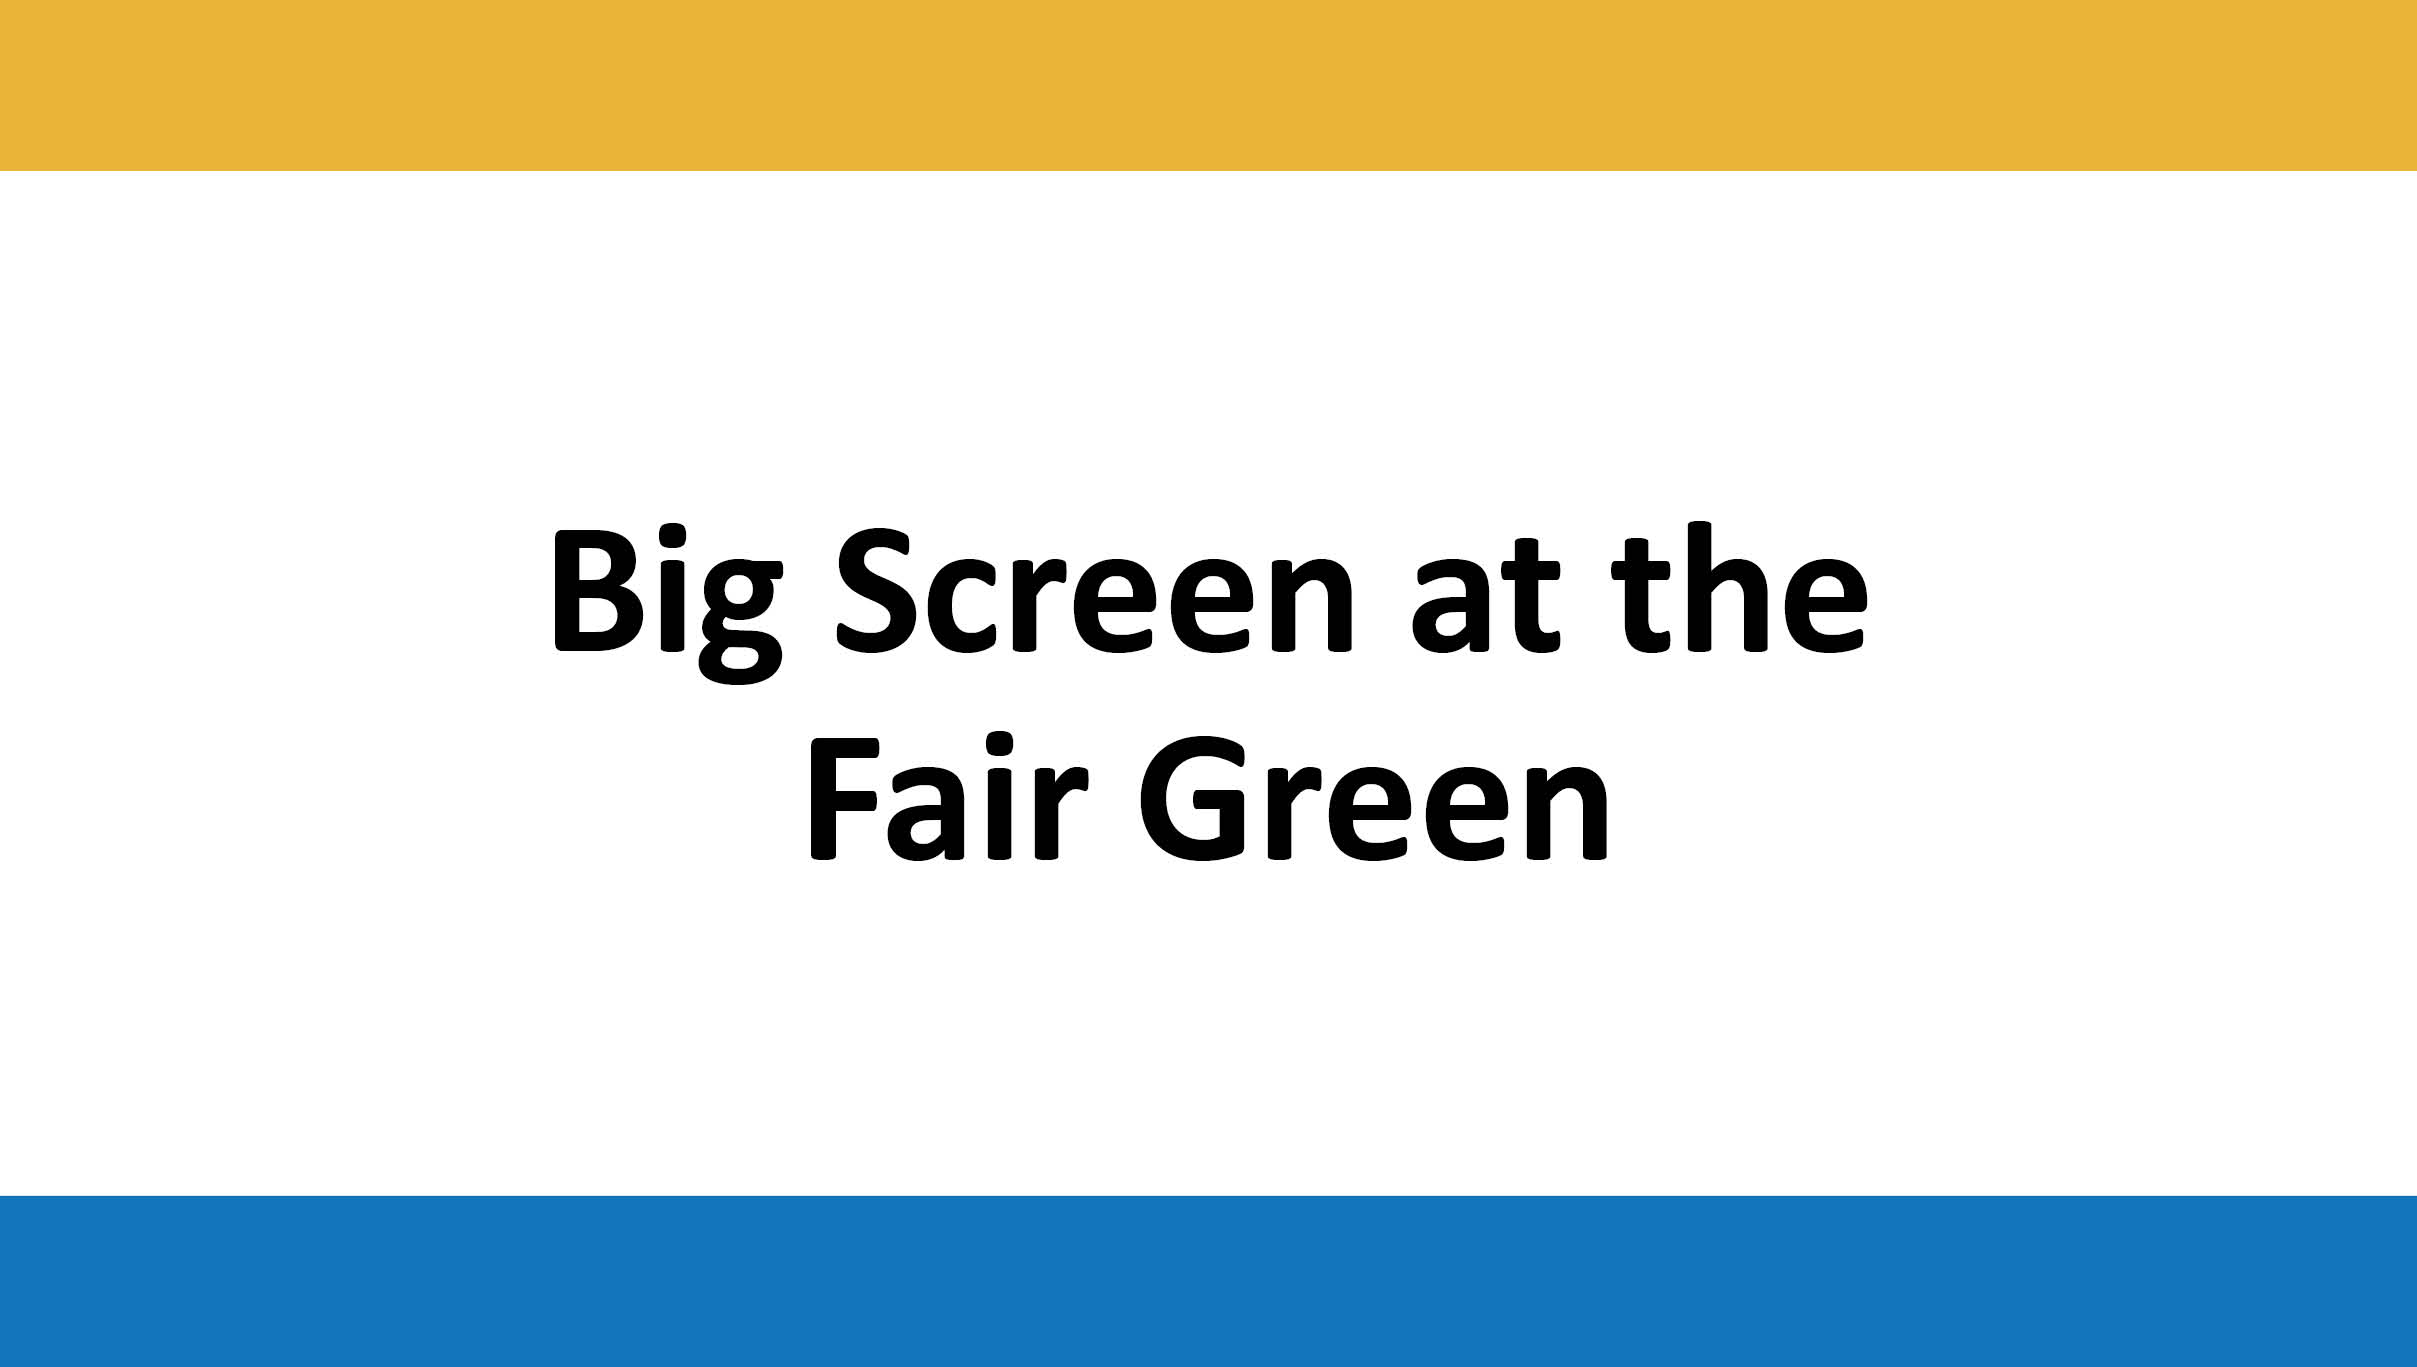 Big Screen at the Fair Green for the All-Ireland Final – Clare vs Cork